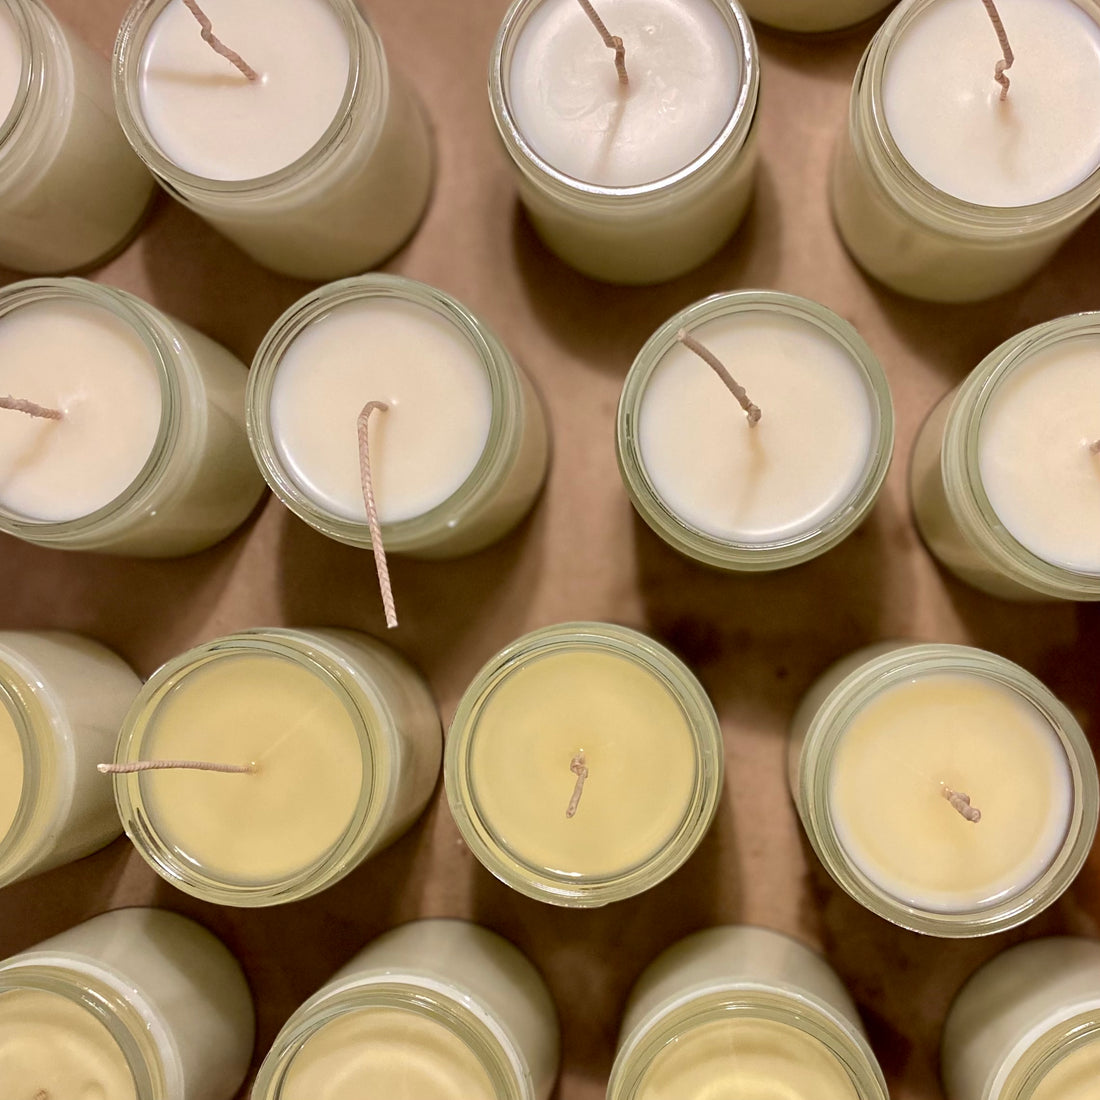 Candles viewed from above during production phase